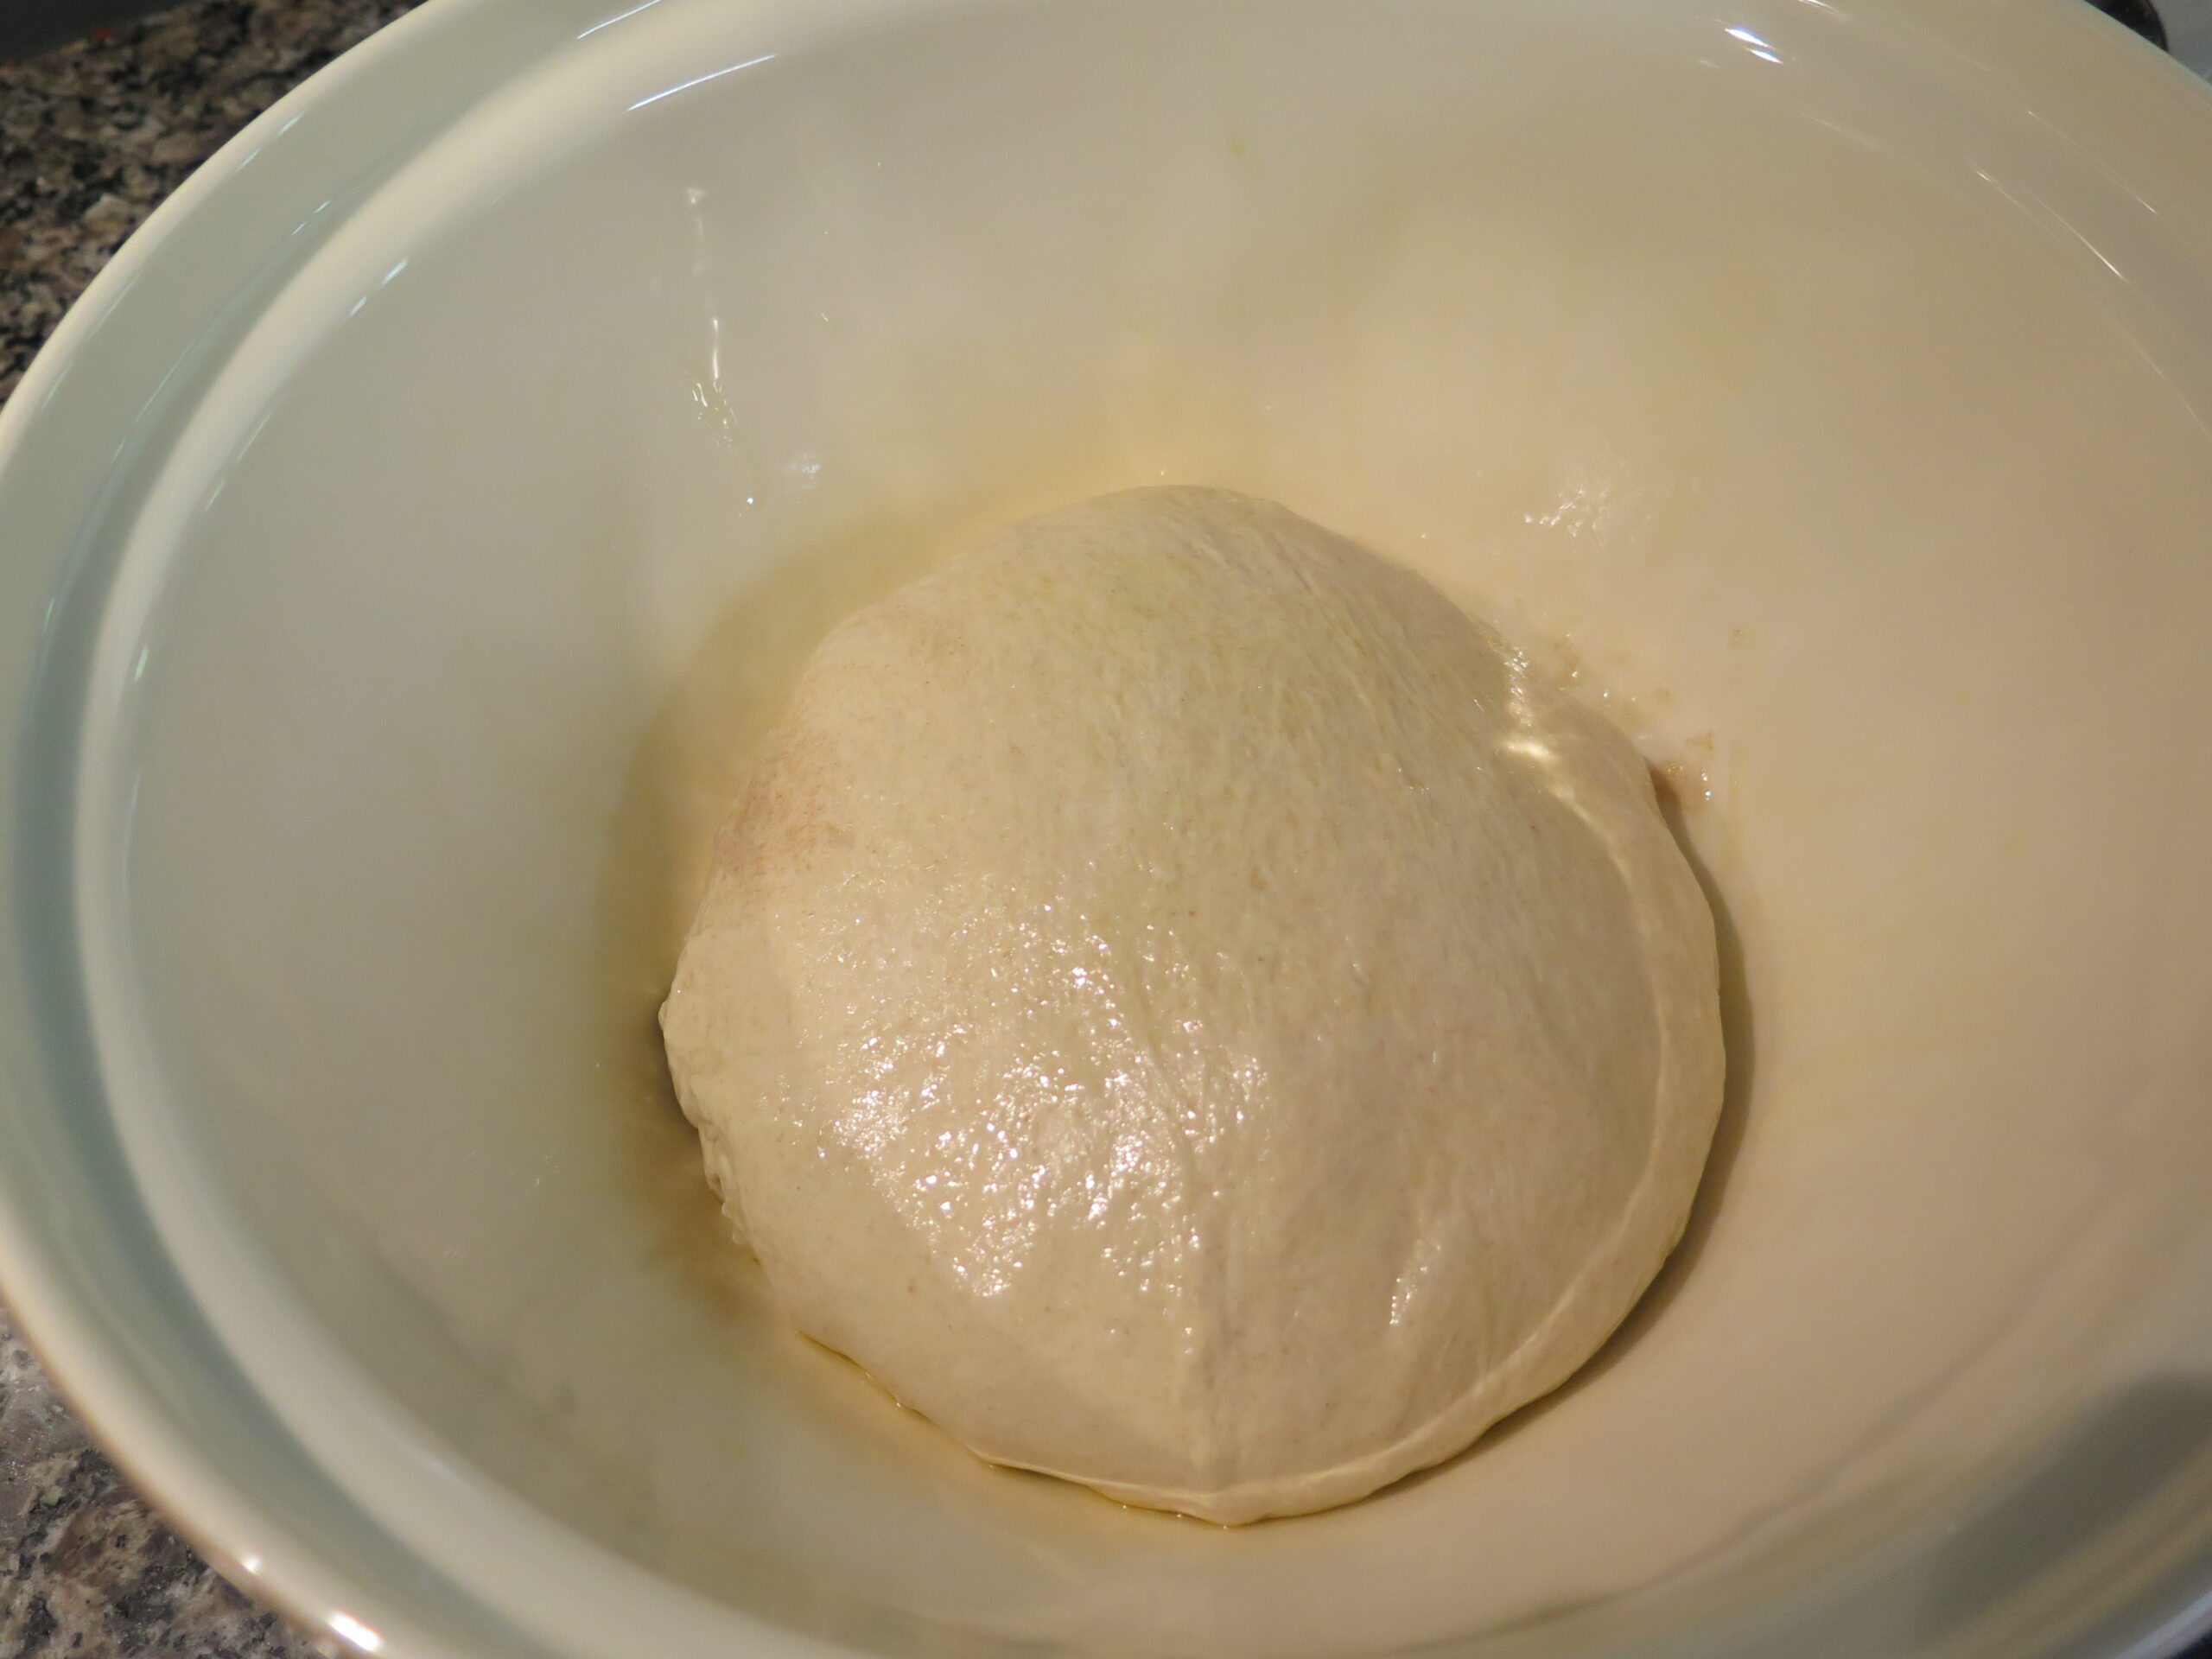 coat dough in oil and place in oiled bowl